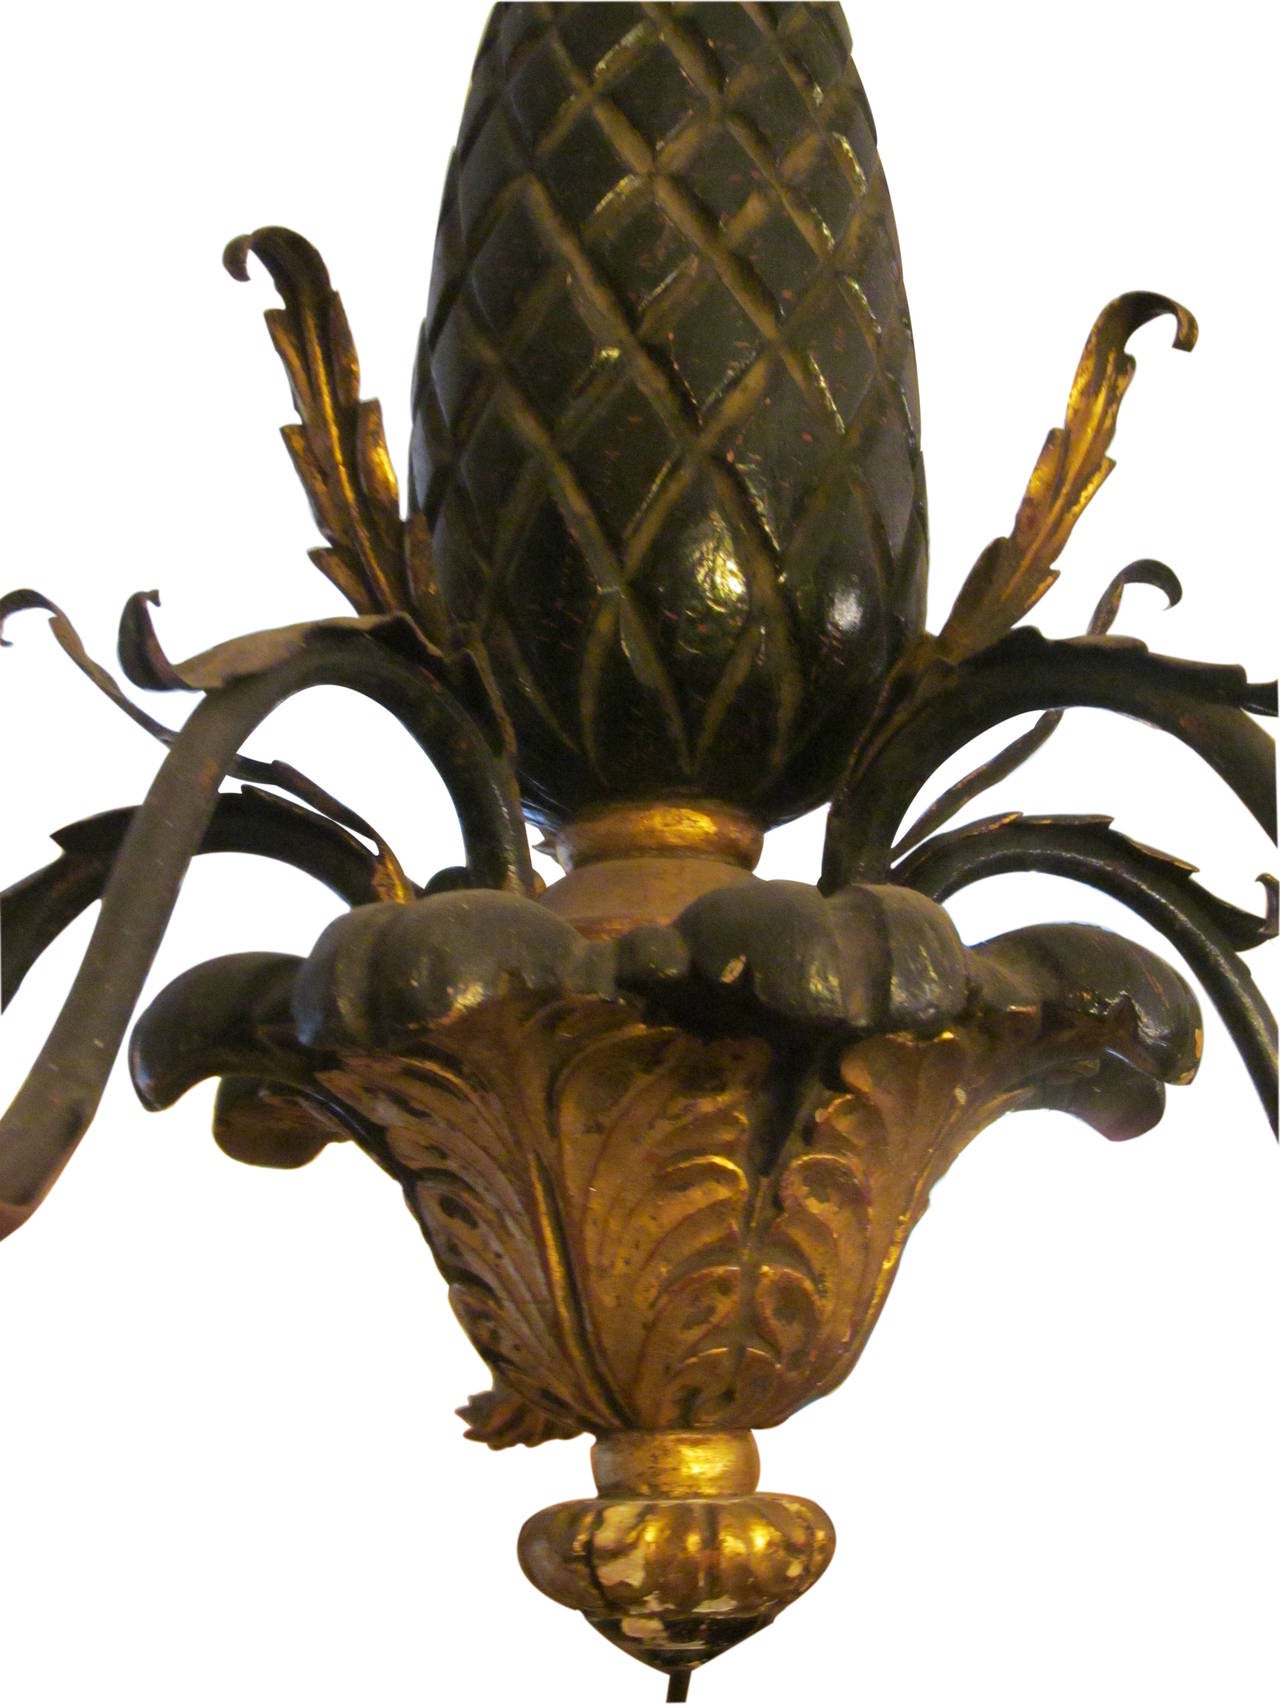 Mid-20th Century 1930s Black Gold Five-Arm Chandelier Done in a French Pineapple Design